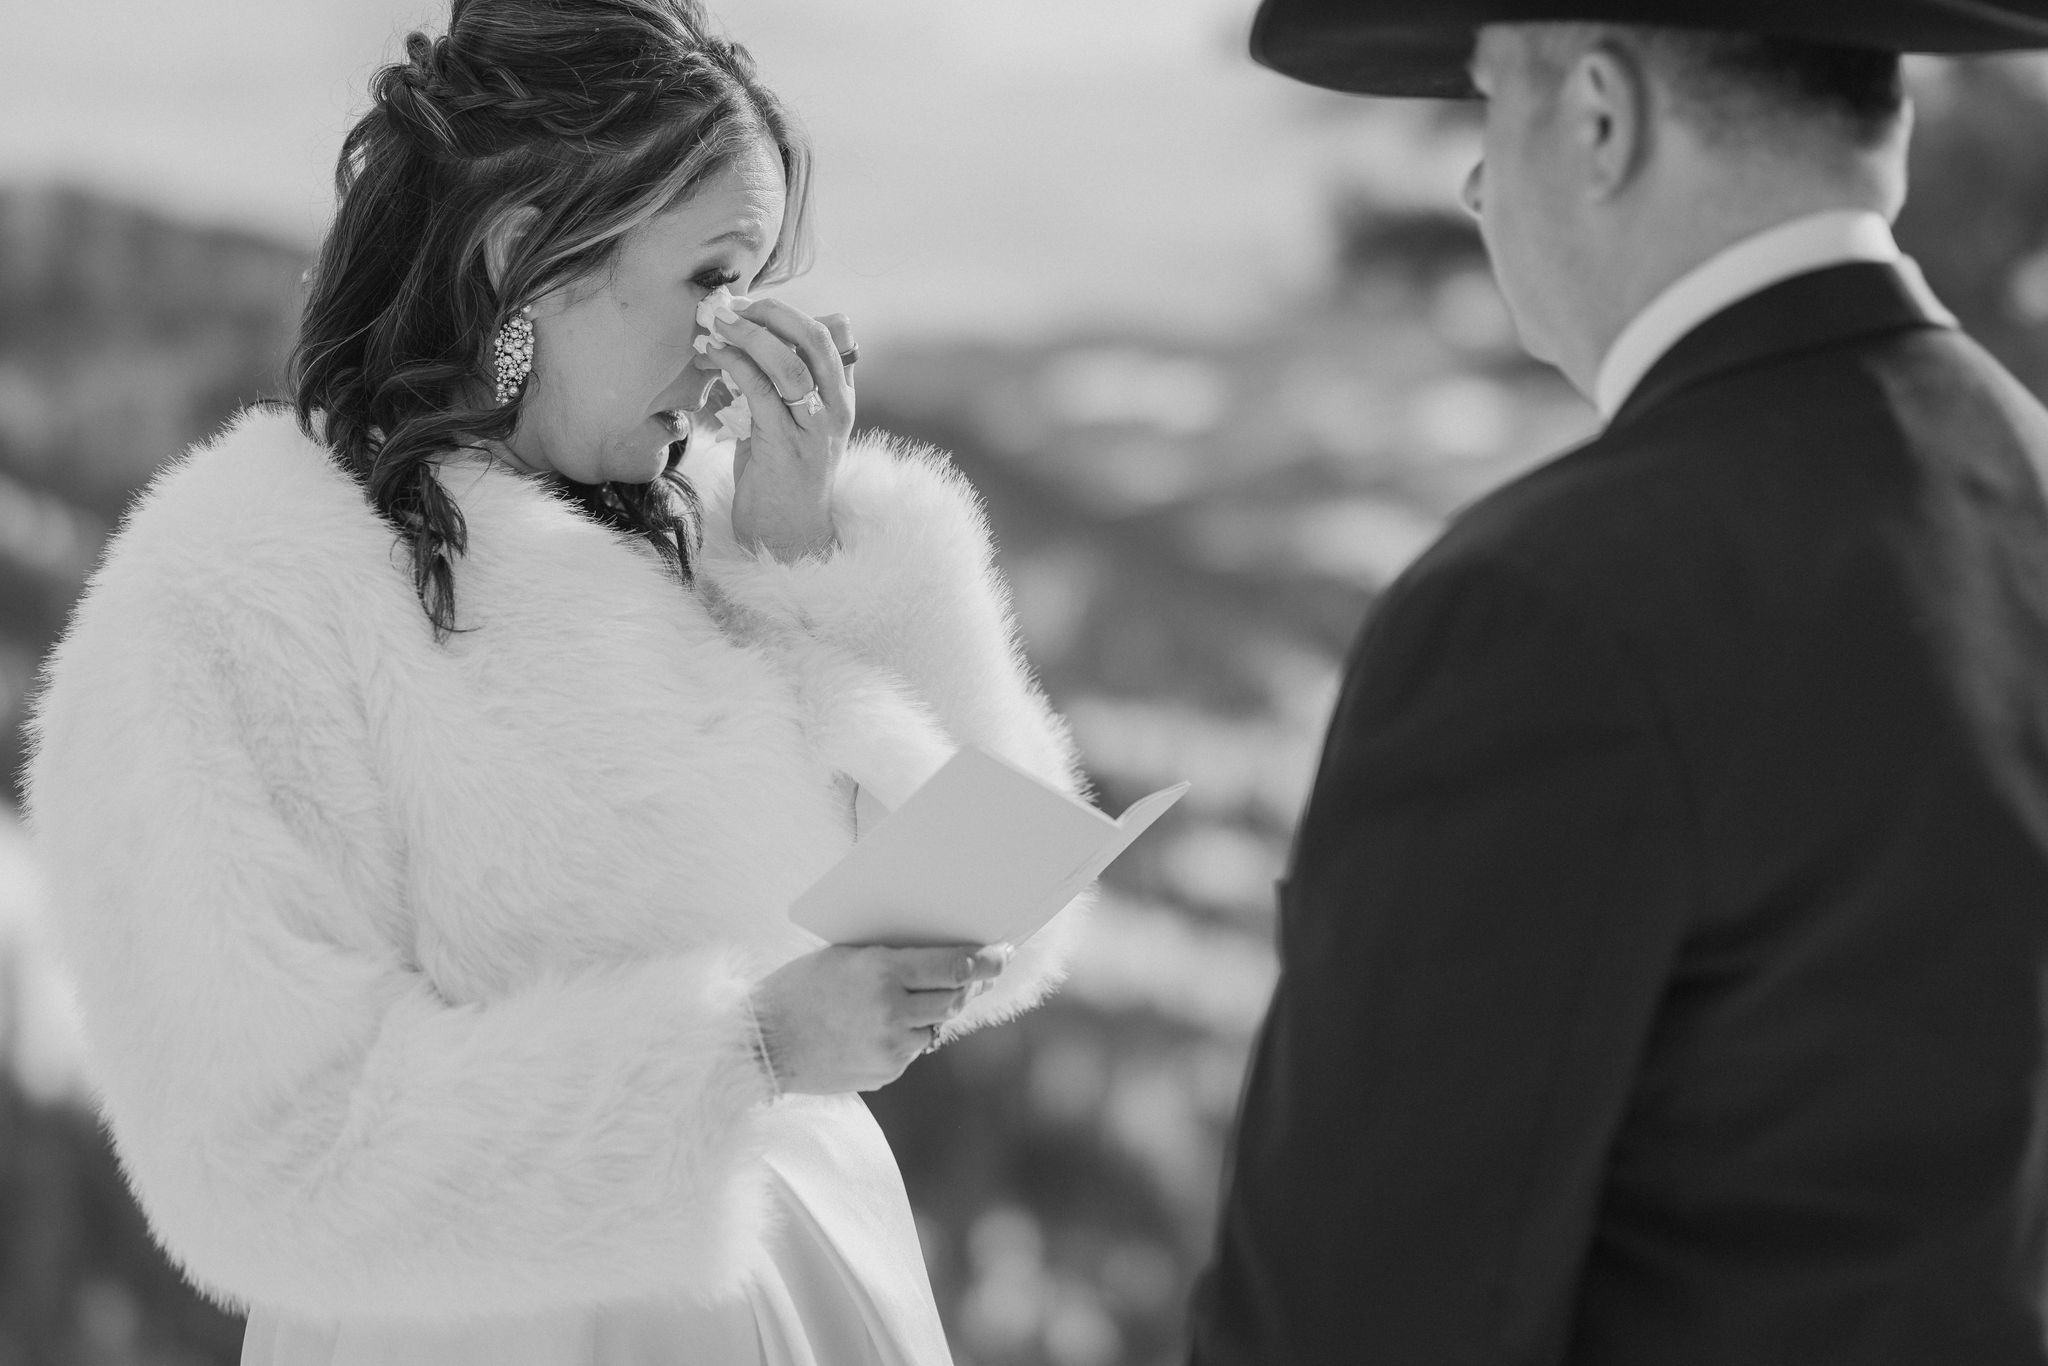 Bride cries during private vow exchange at Sapphire Point elopement.